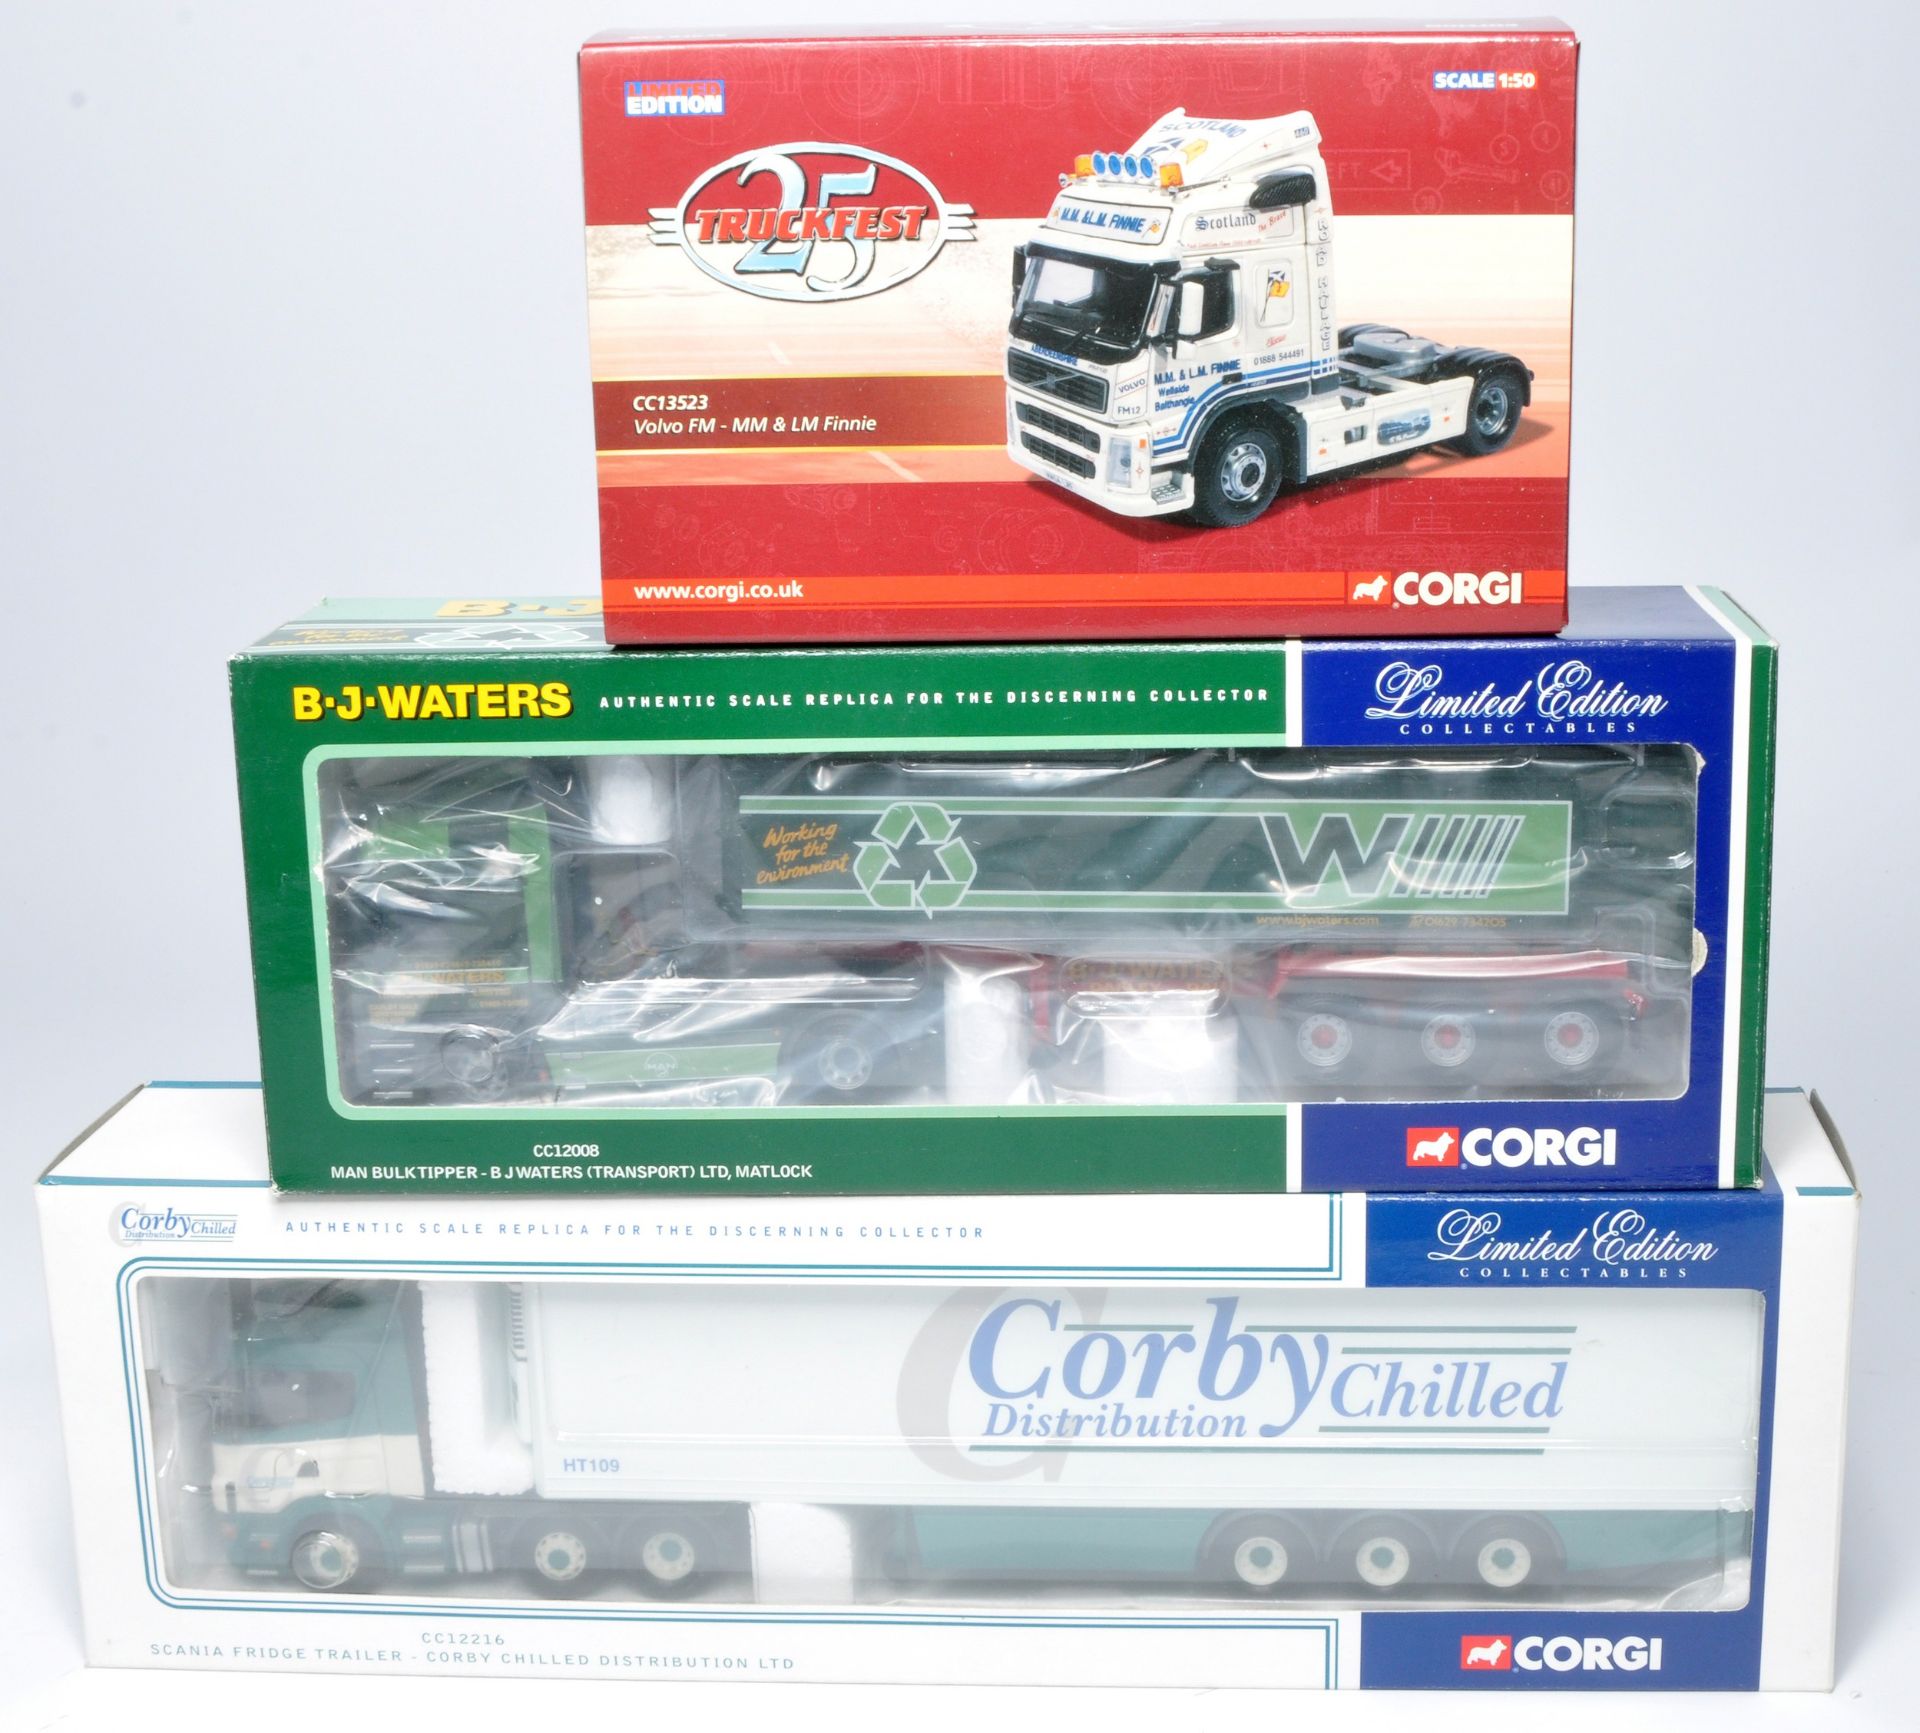 Corgi 1/50 diecast model truck issues comprising Finnie, Waters and Corby Distribution liveries.